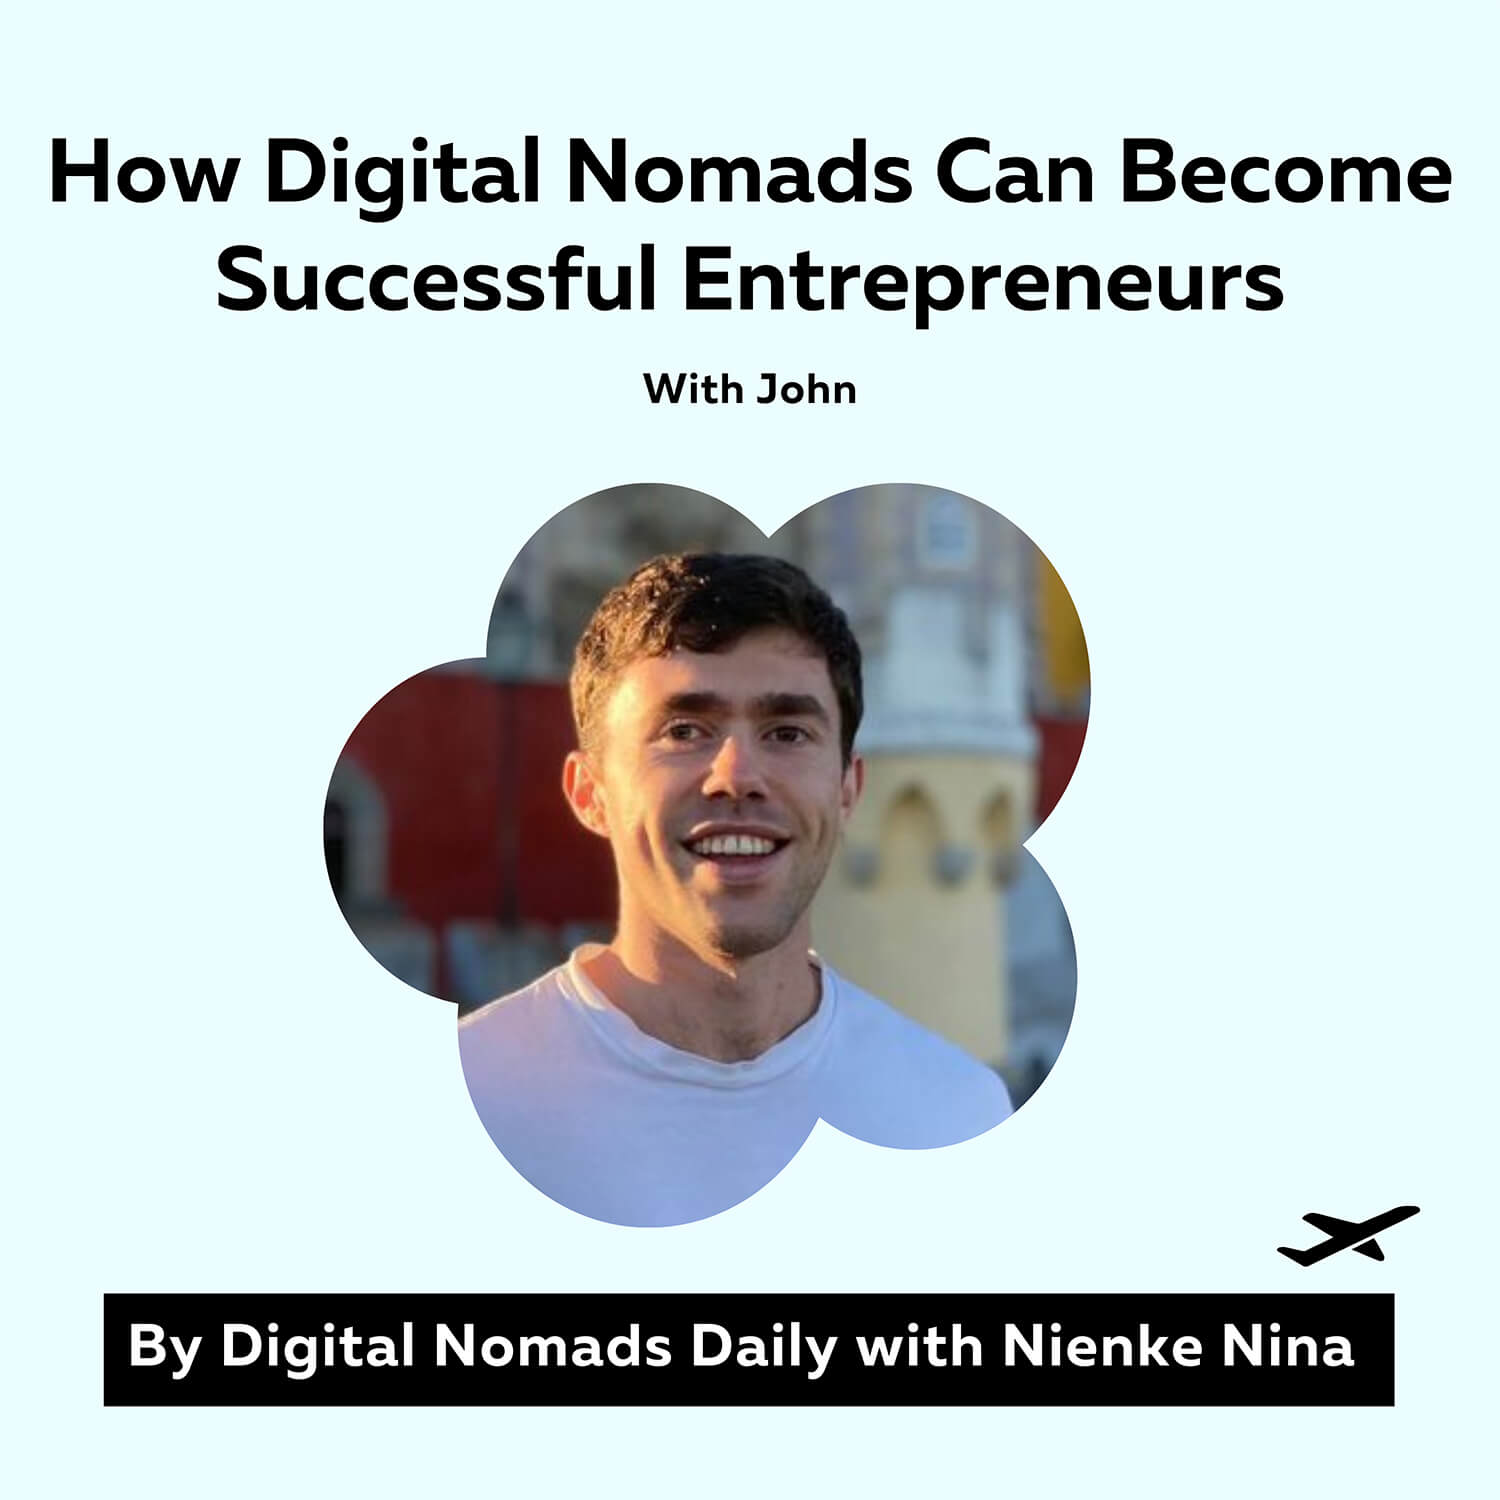 Digital Nomads Daily Podcast Cover How Digital Nomads Can Become Successful Entrepreneurs With John (1)